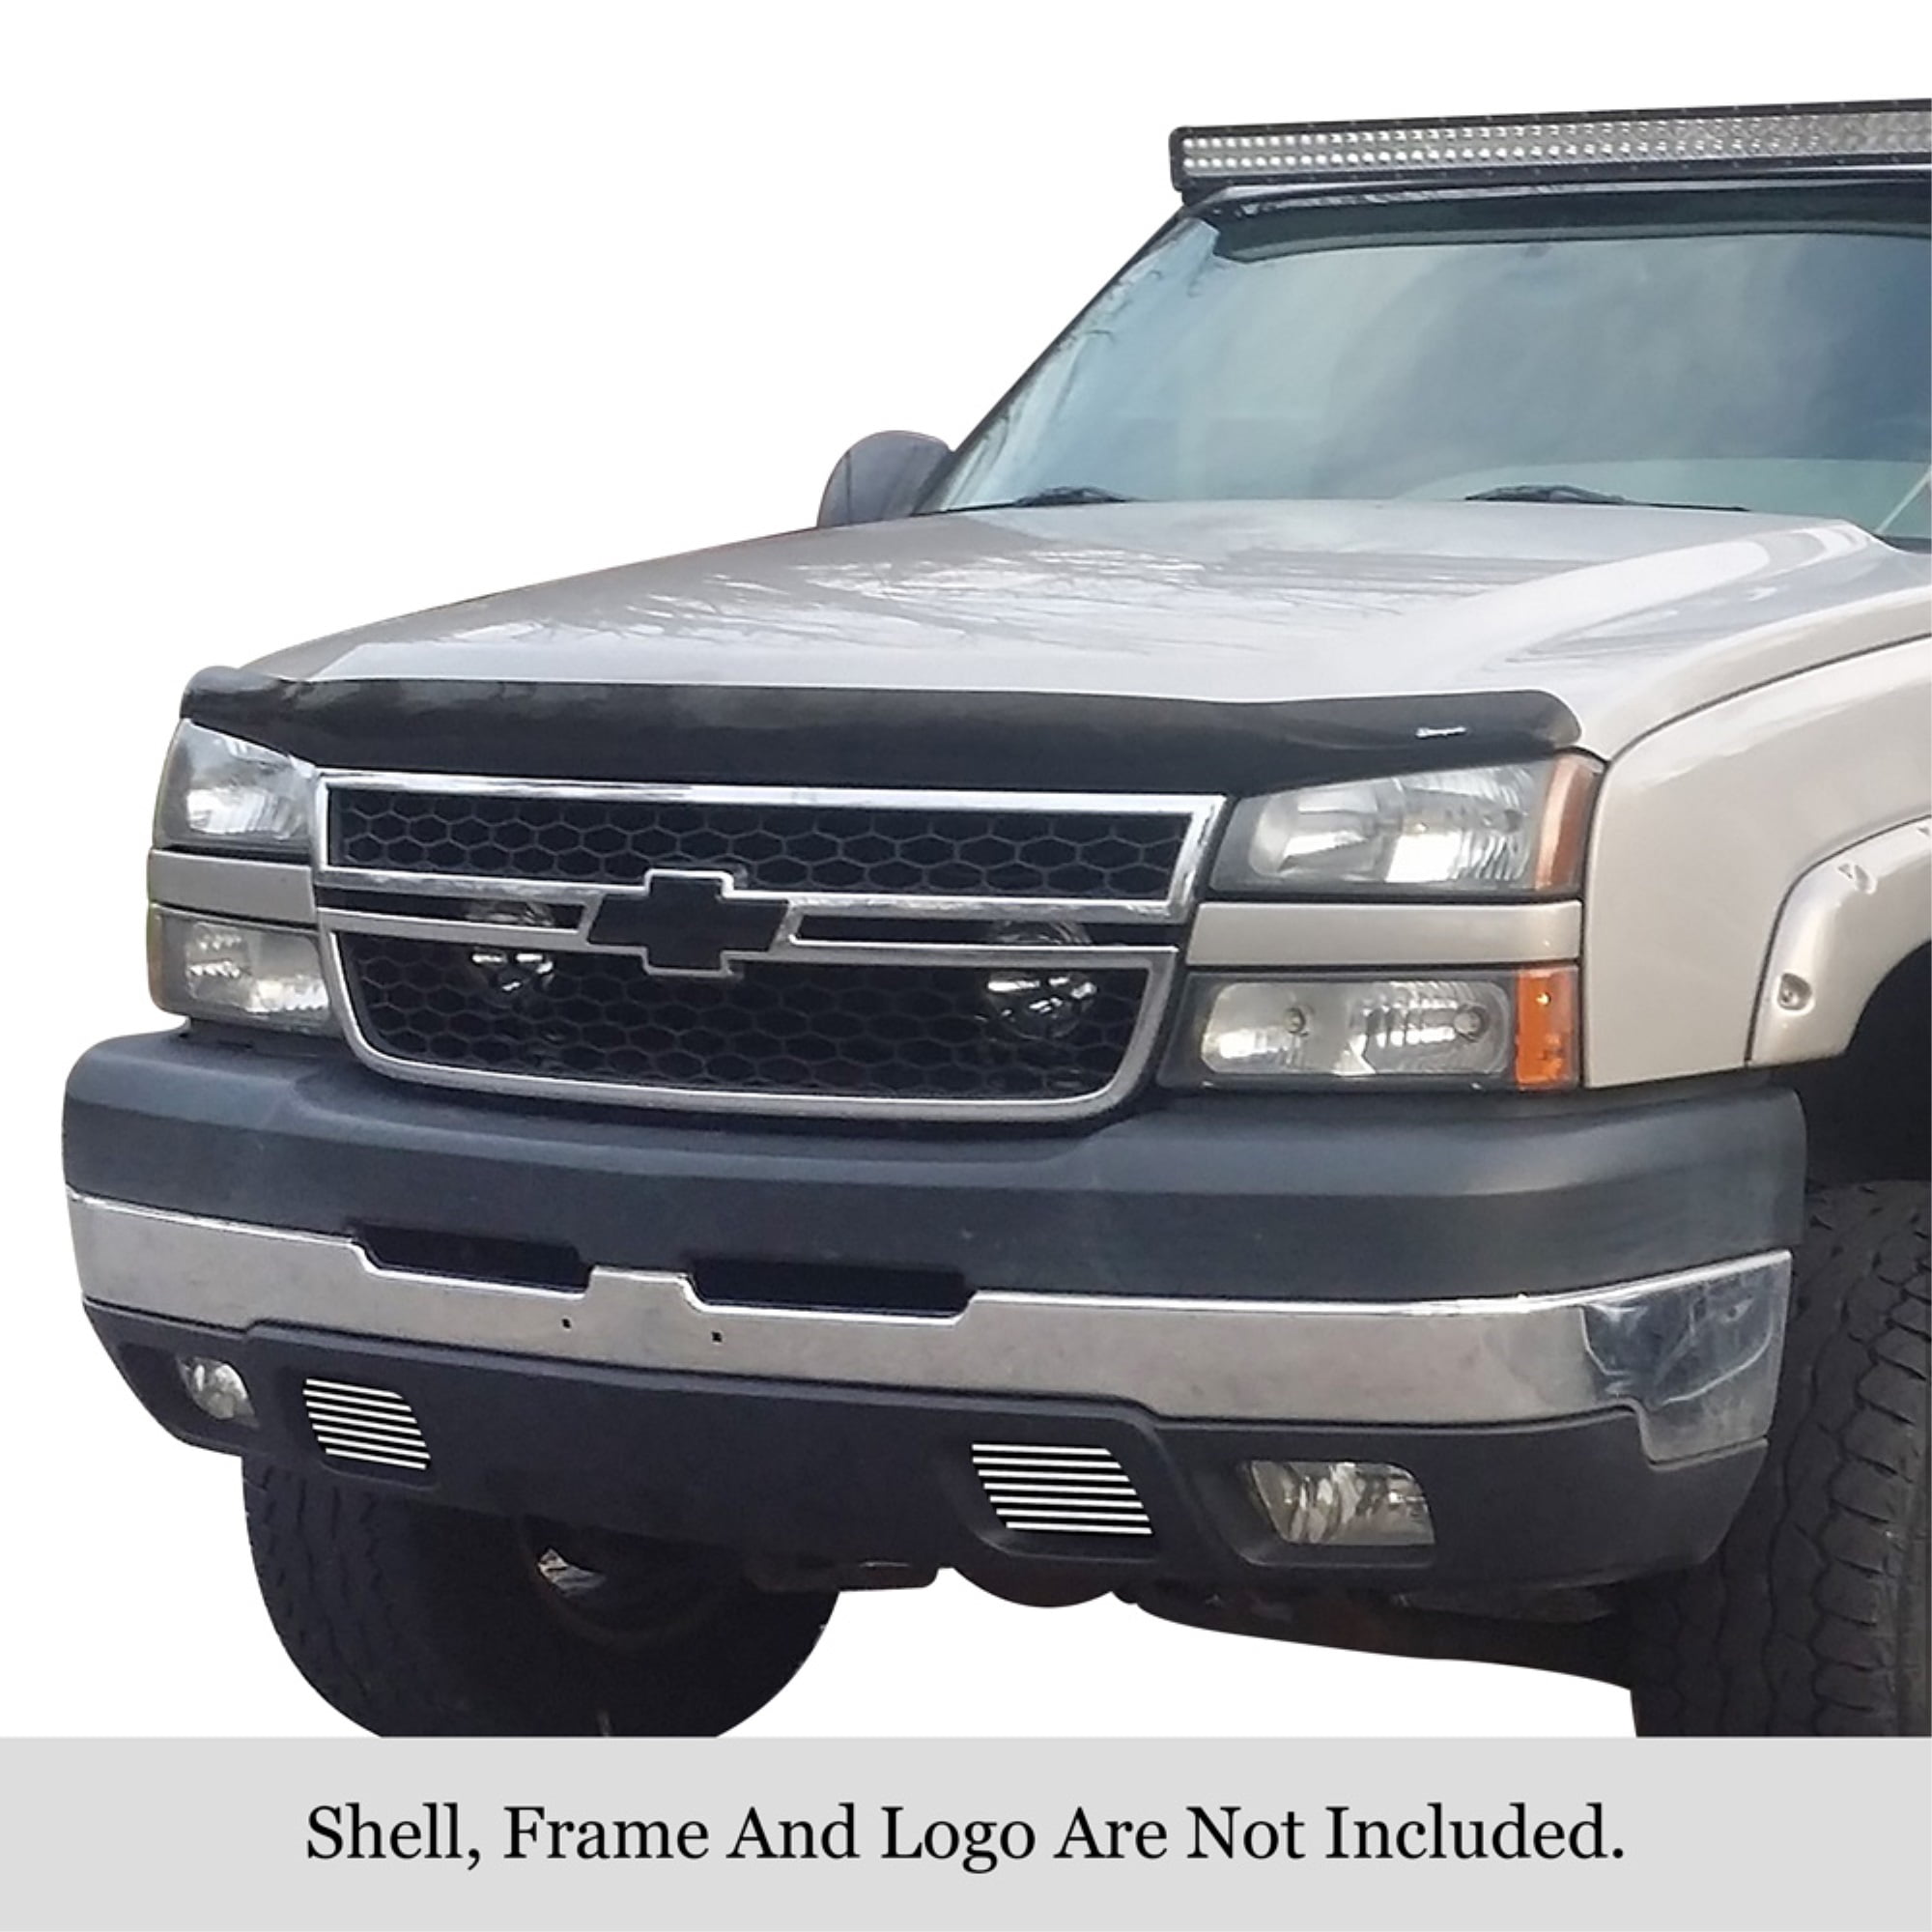 APS 2003-2006 Chevy Silverado 1500 Tow Hook Cover Stainless Steel Billet  Grille 8x6 horizontal billet